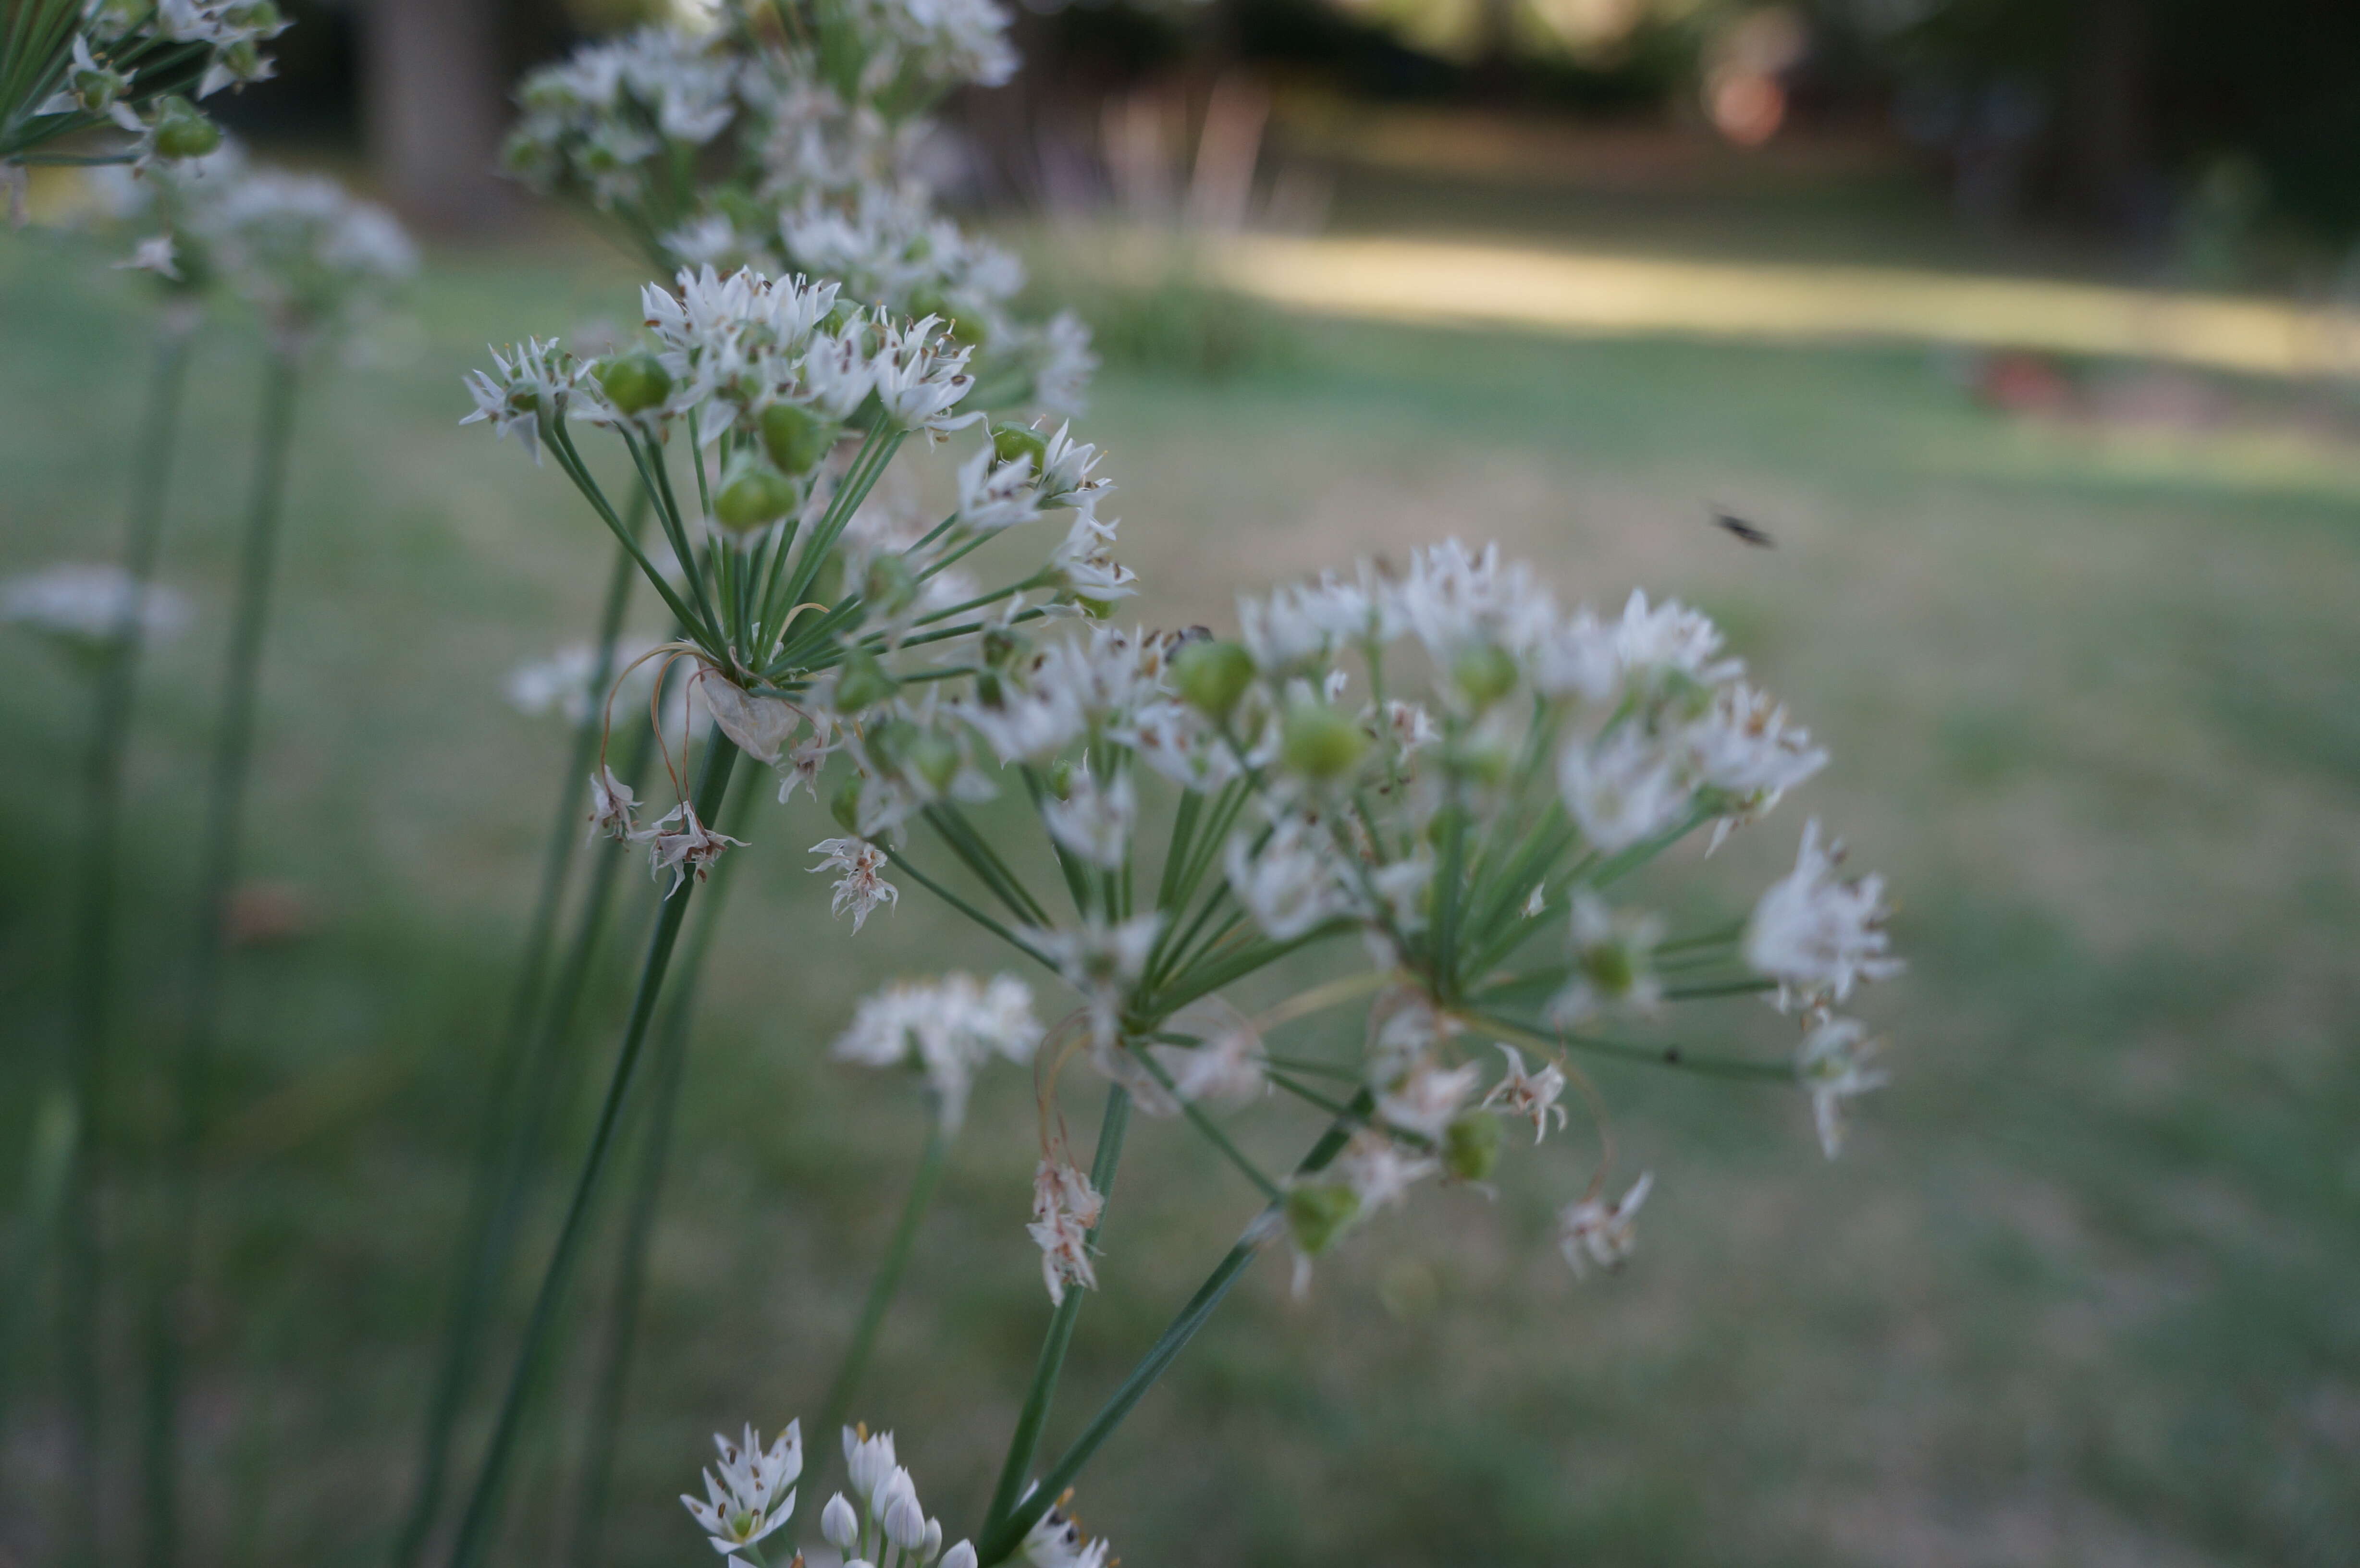 Image of Chinese chives